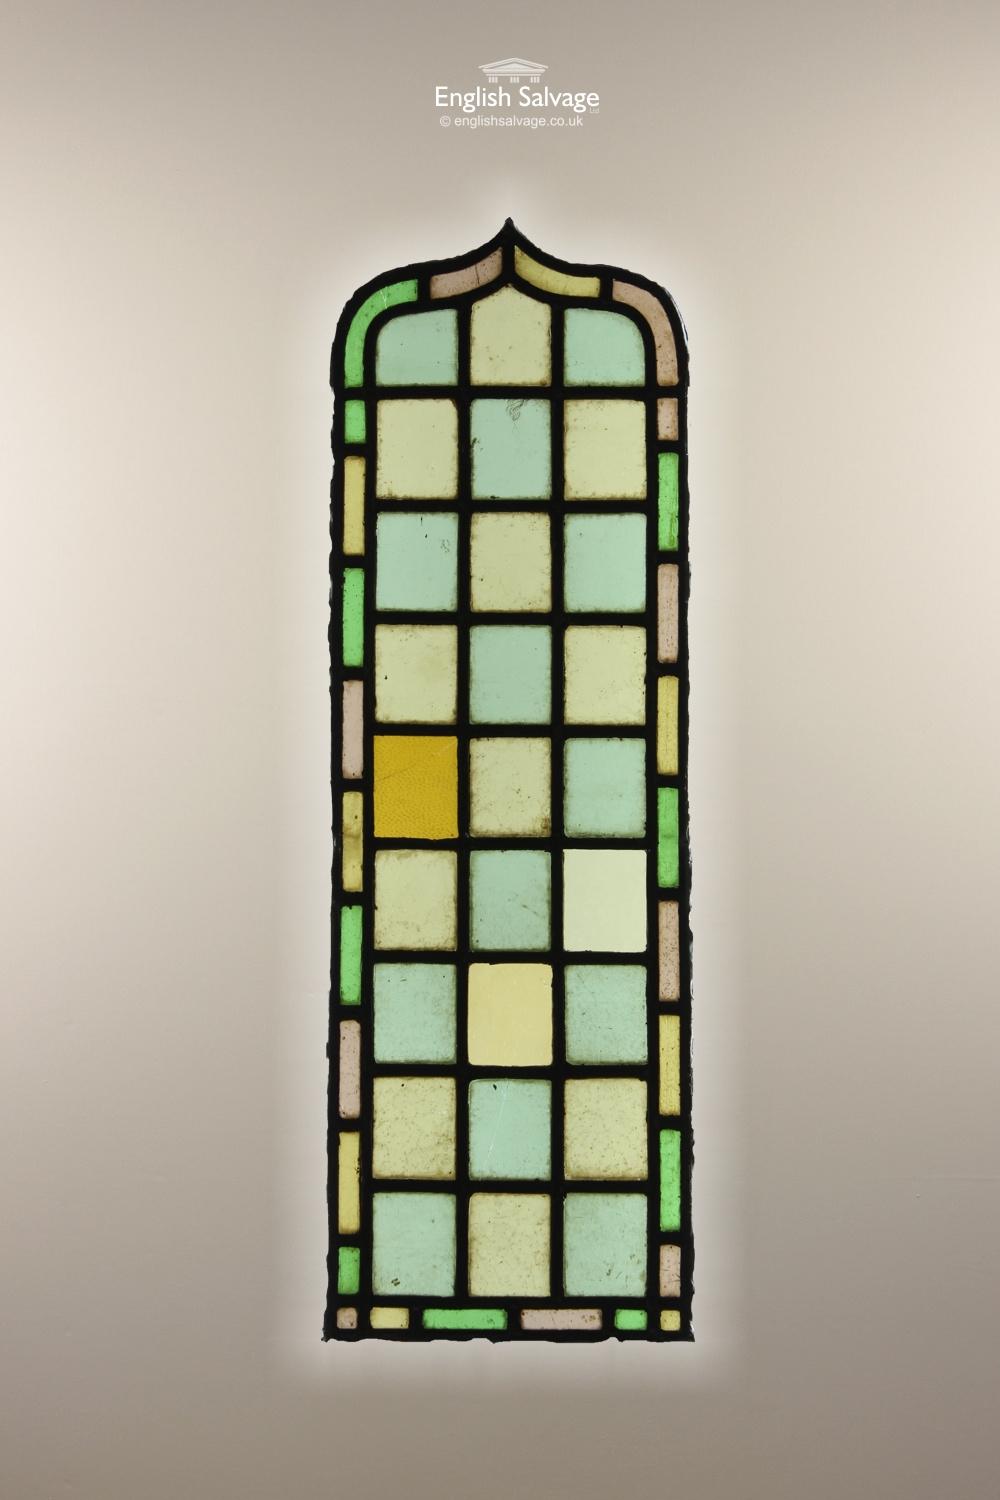 Reclaimed colorful stained glass lead panels. The shaped arch pieces come in two sizes:- a) three panes across plus edging = 28.6cm wide, 89.5cm high and b) two panes across plus edging = 25.8cm wide x 95.5cm. 

Various chips, cracks.